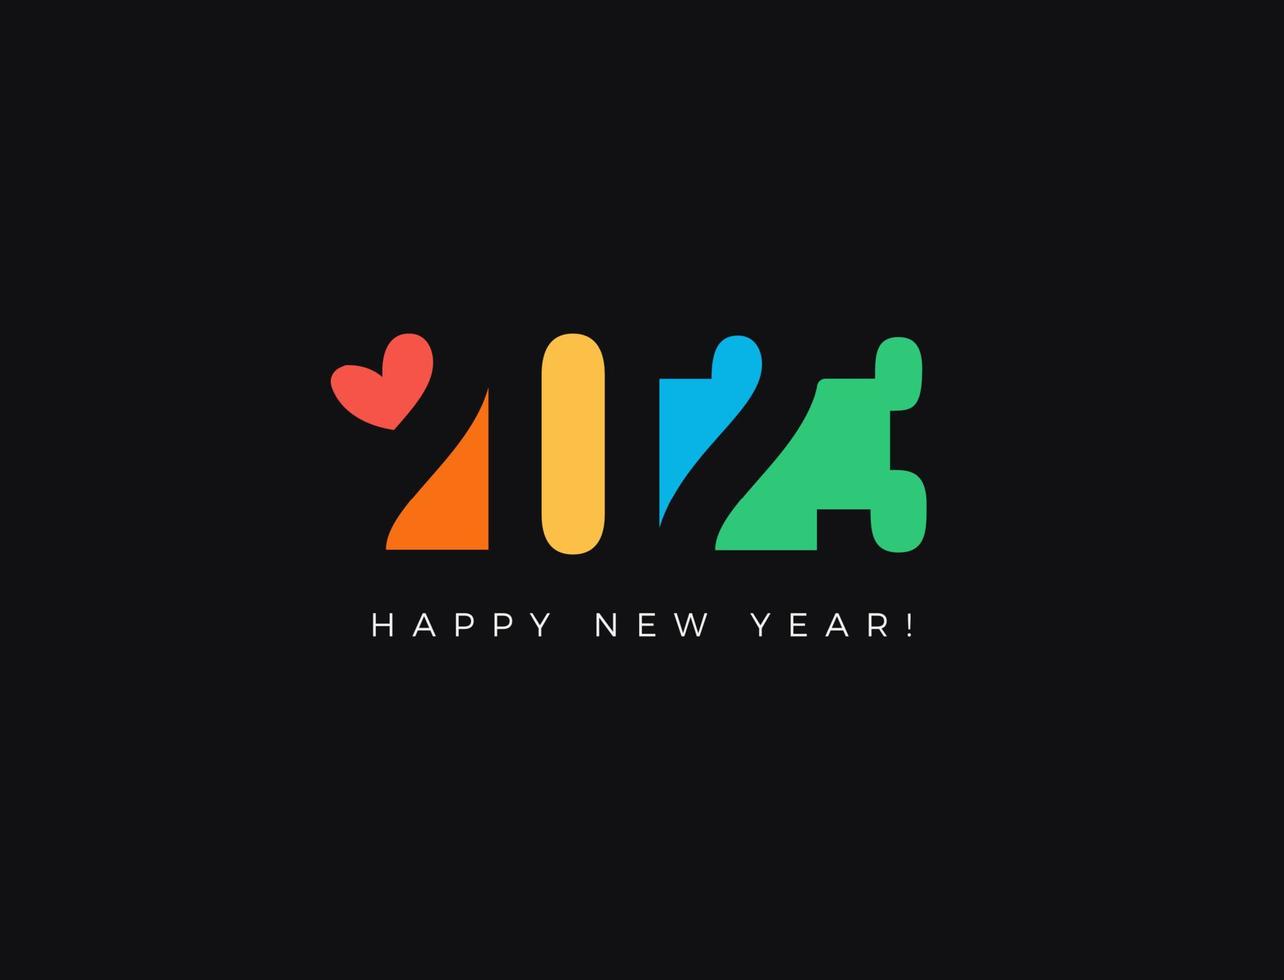 2023 colored numbers in negative space style on black backdrop. Happy New Year event poster, greeting card cover, 2023 calendar design, invitation to celebrate New Year. Vector illustration.